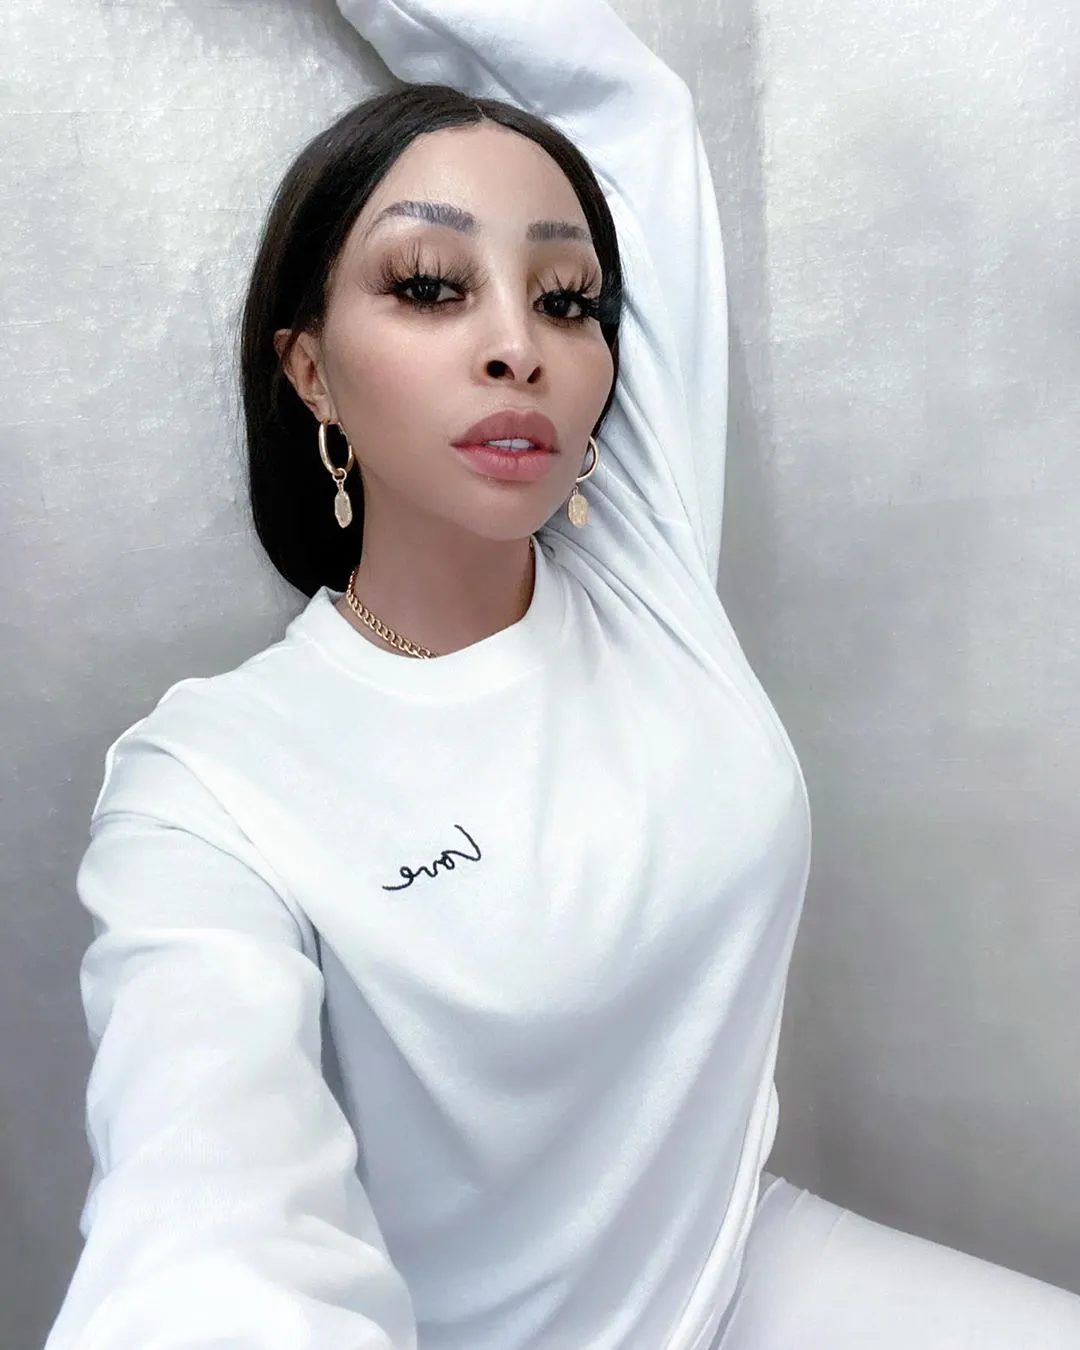 Mzansi Reacts To Old Video Of Khanyi Mbau Speaking About Blessers